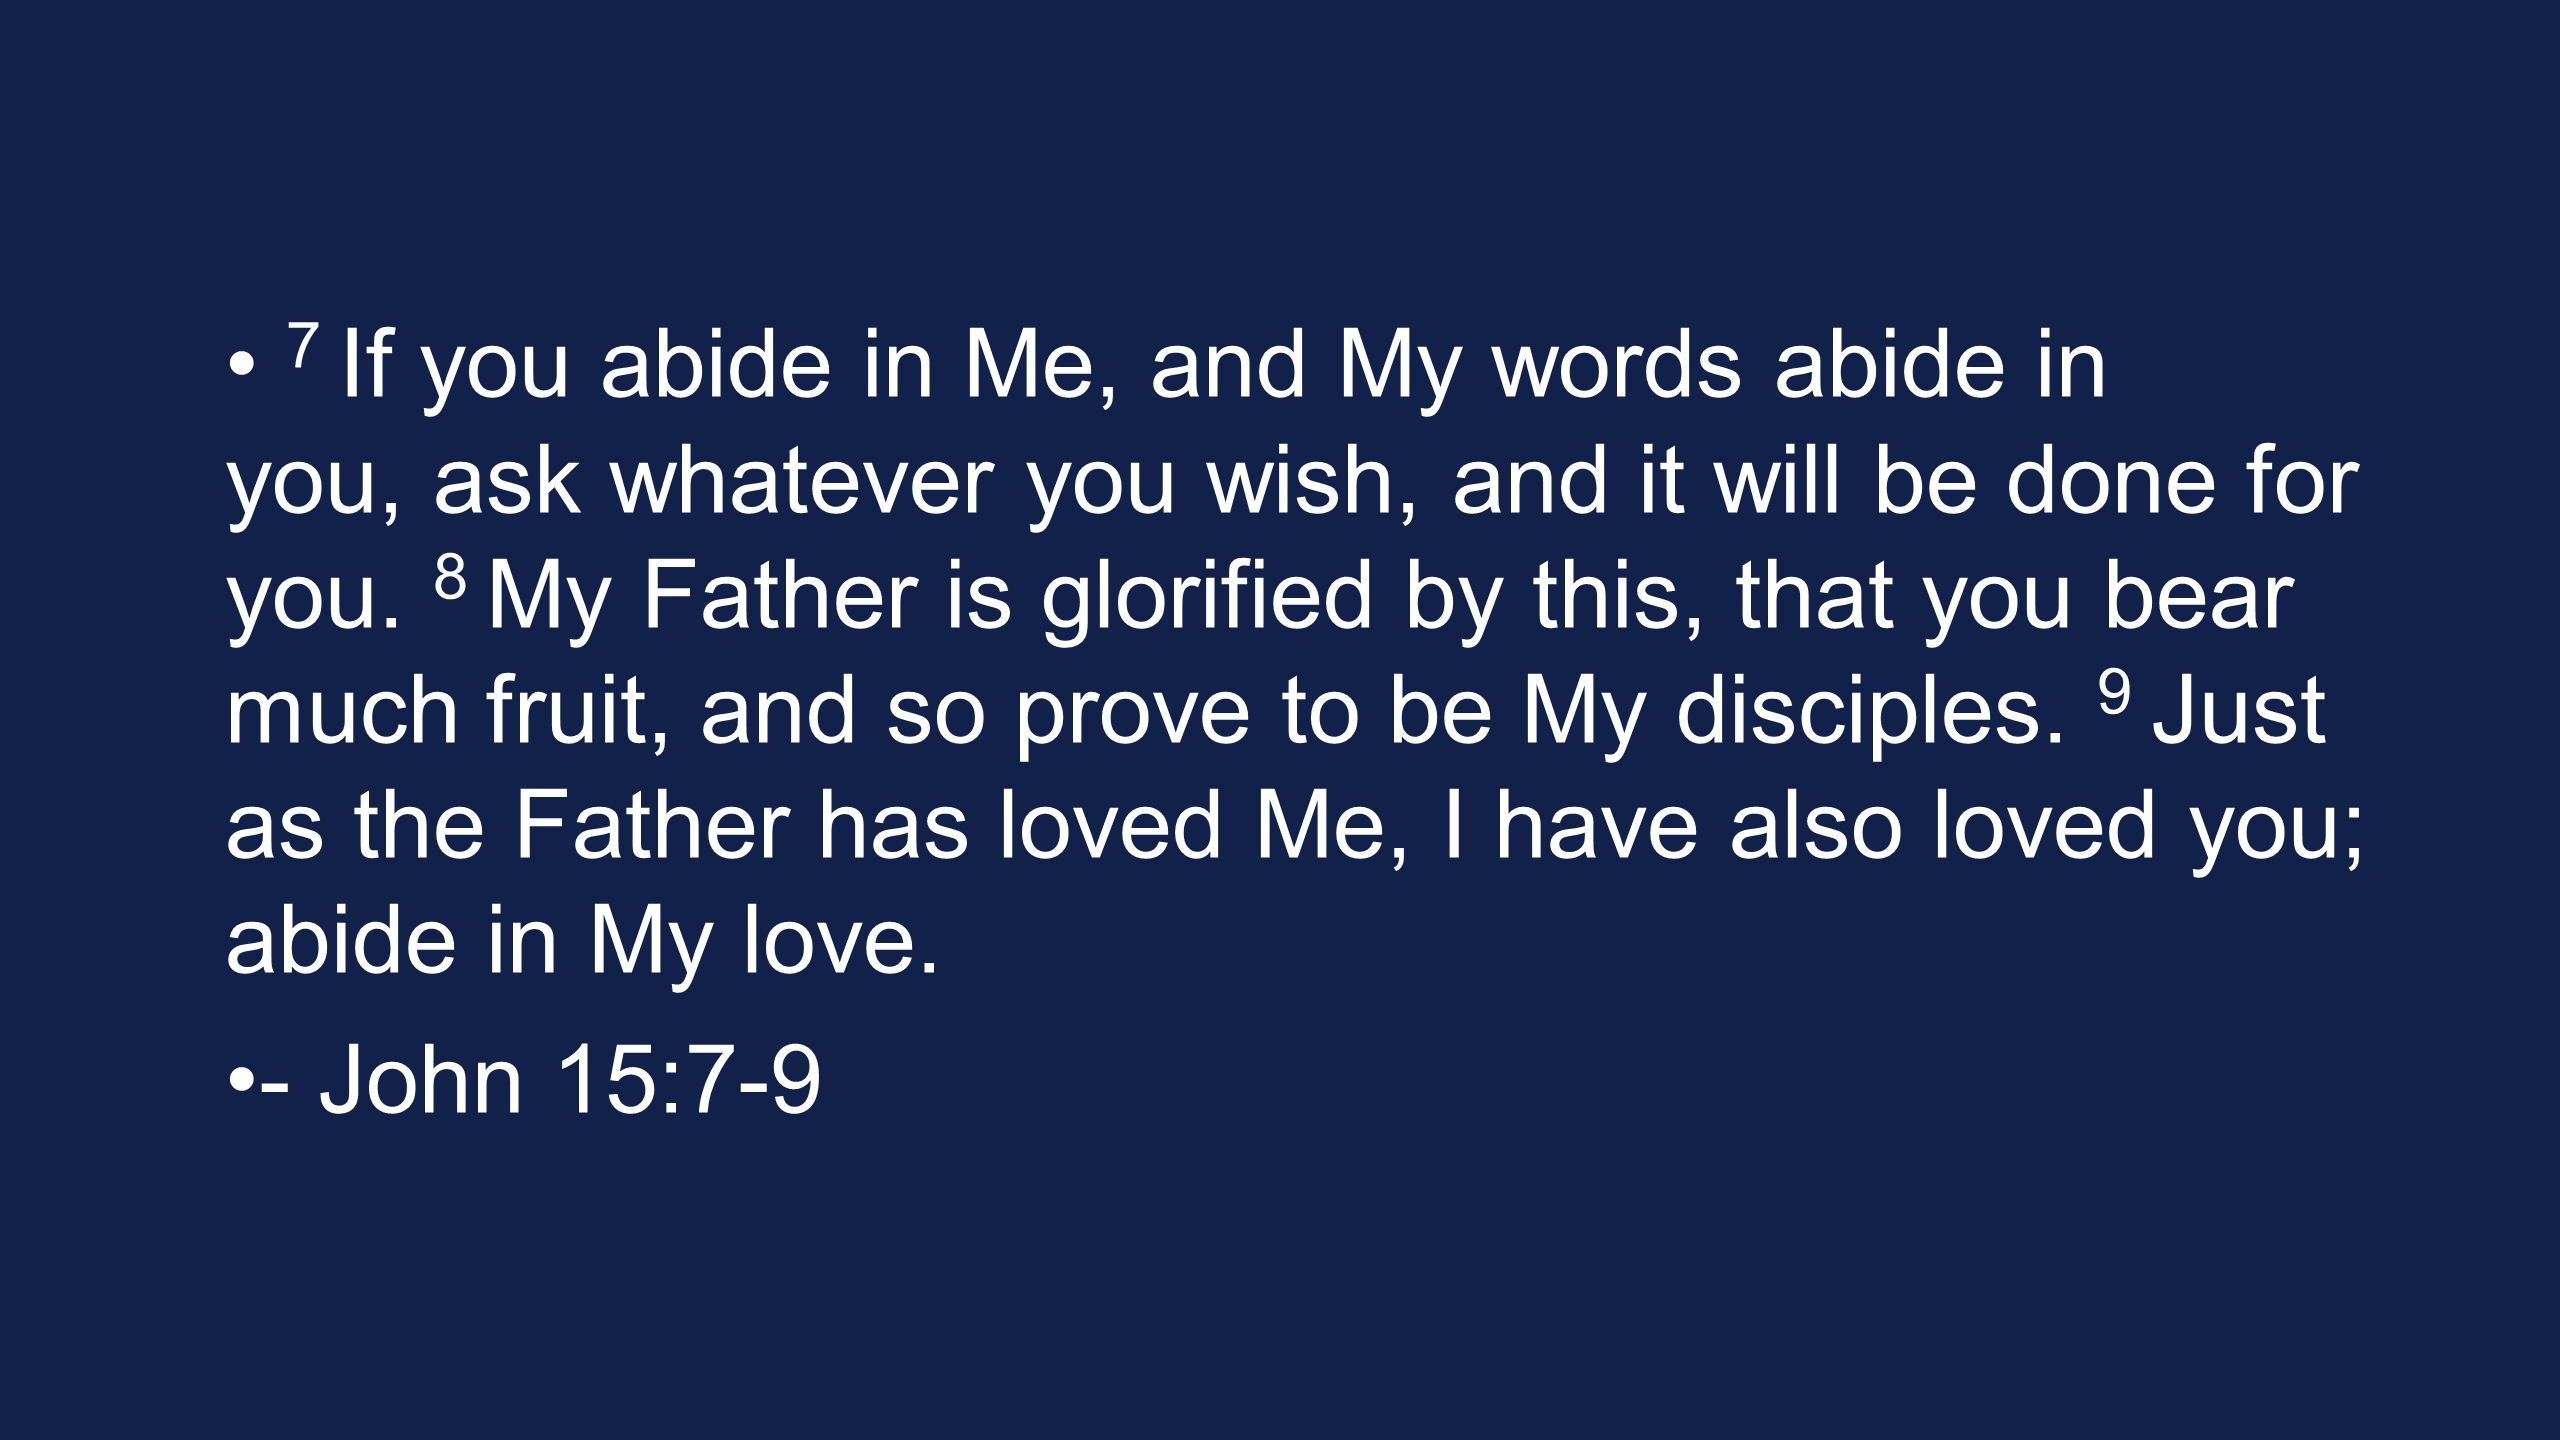 7 If you abide in Me, and My words abide in you, ask whatever you wish, and it will be done for you.